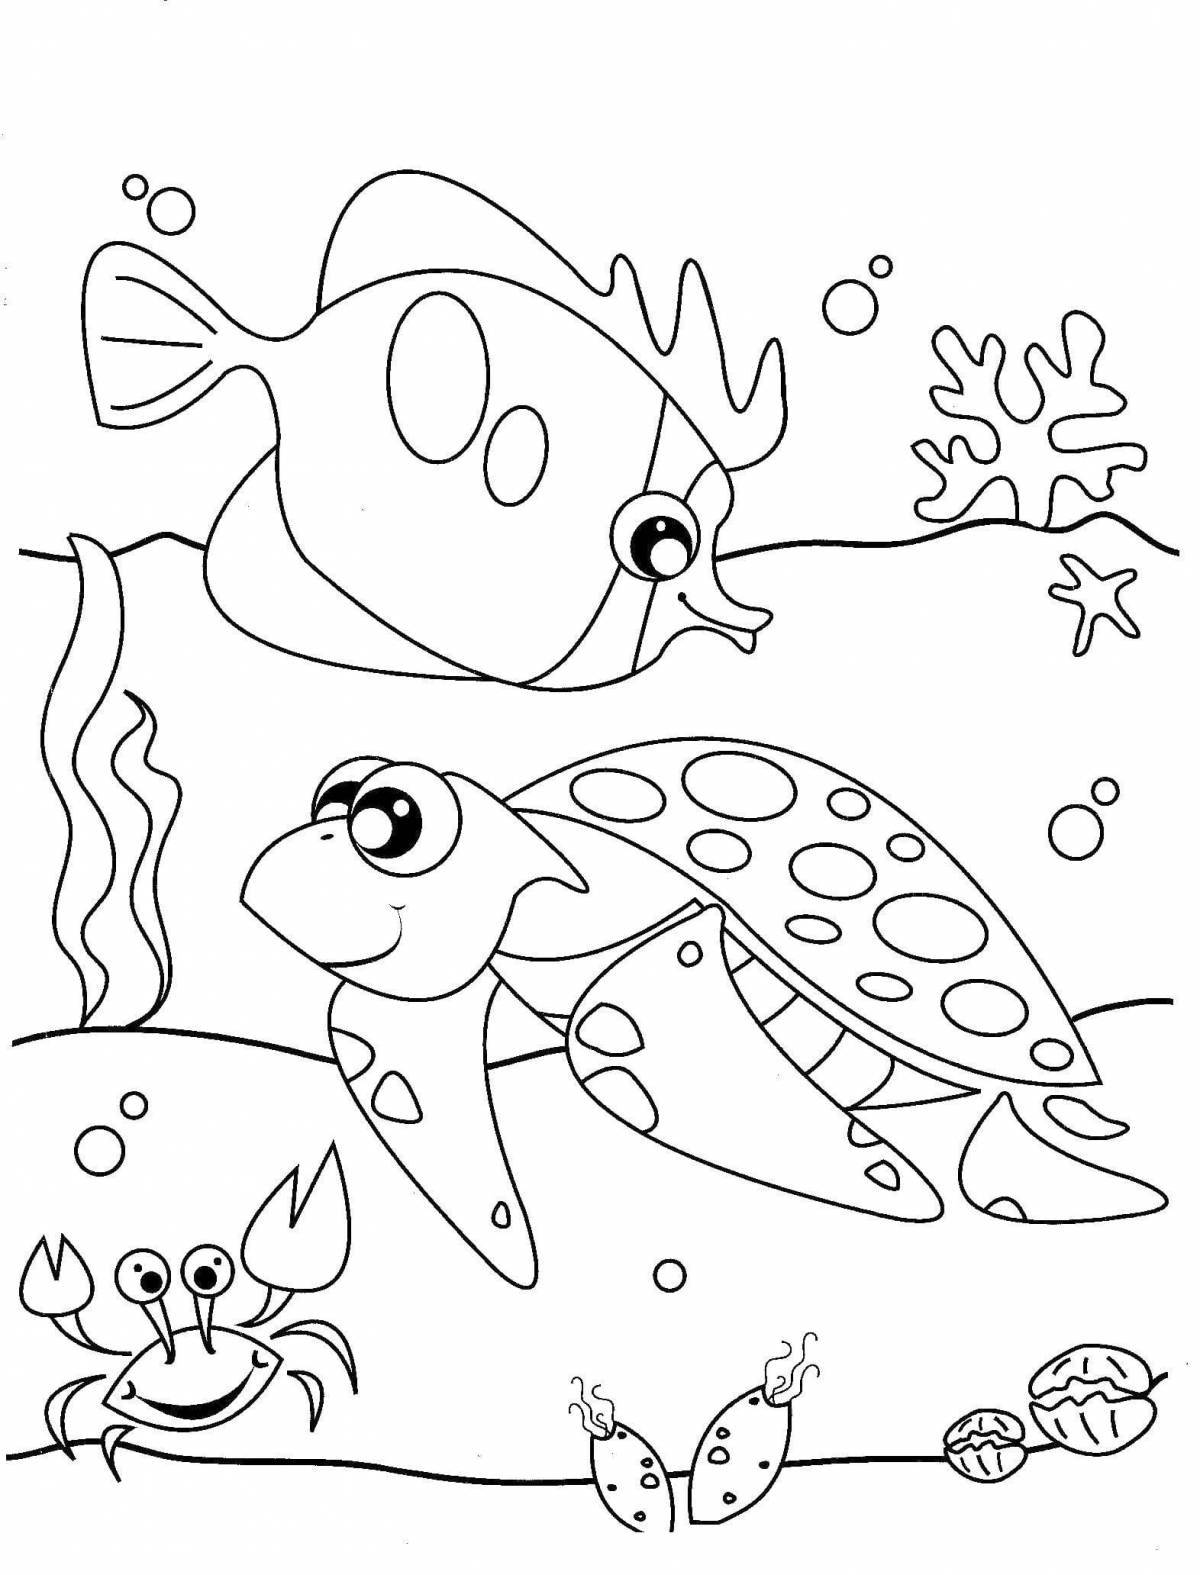 Calming water coloring page